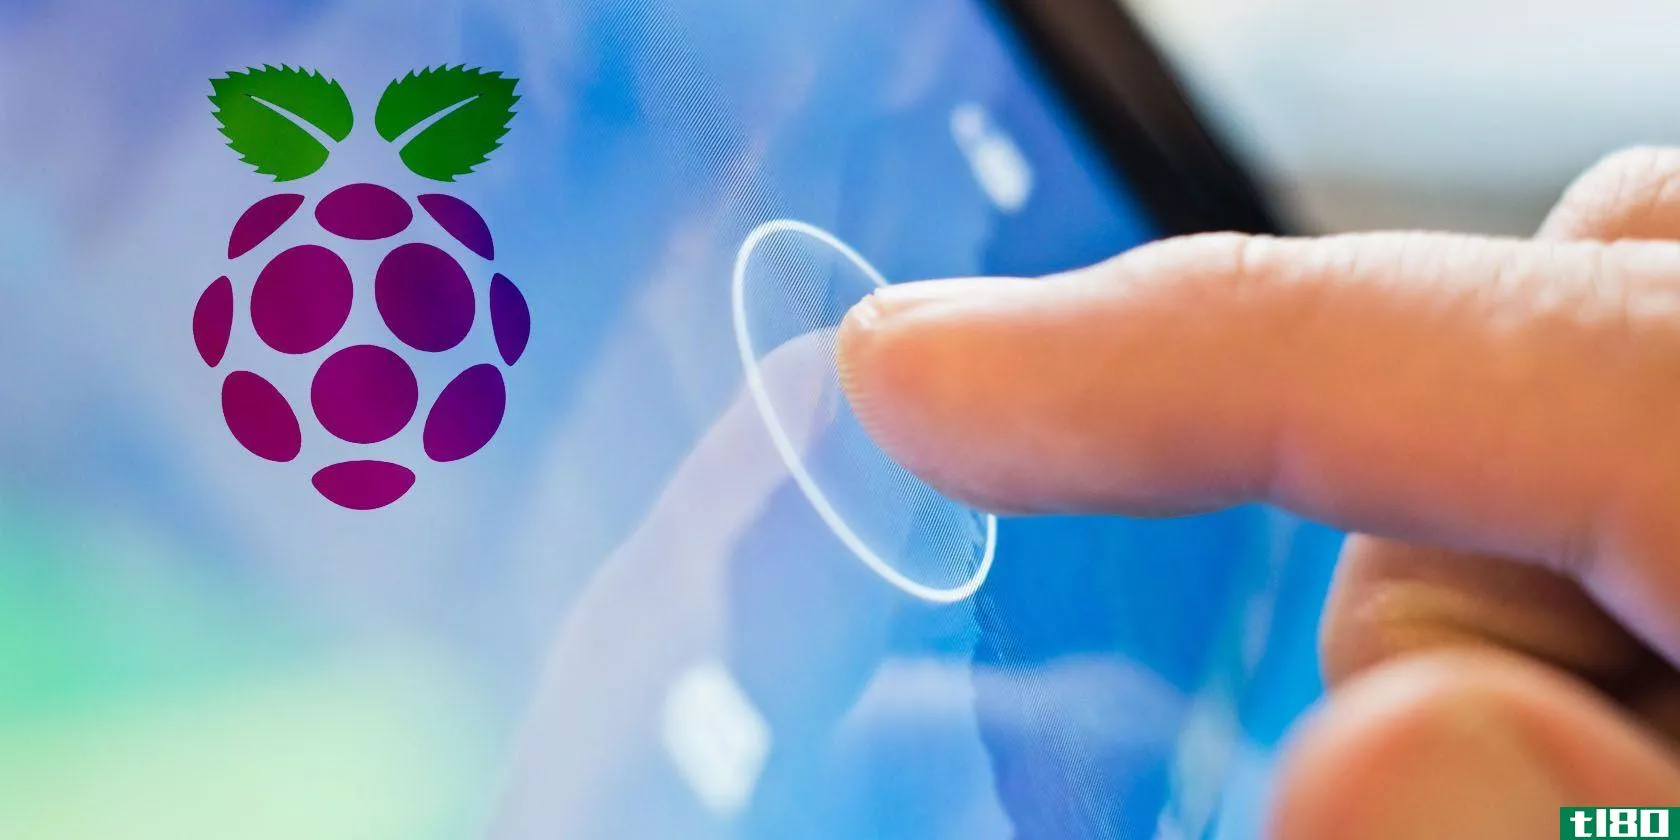 touch-screen-raspberry-pi-featured